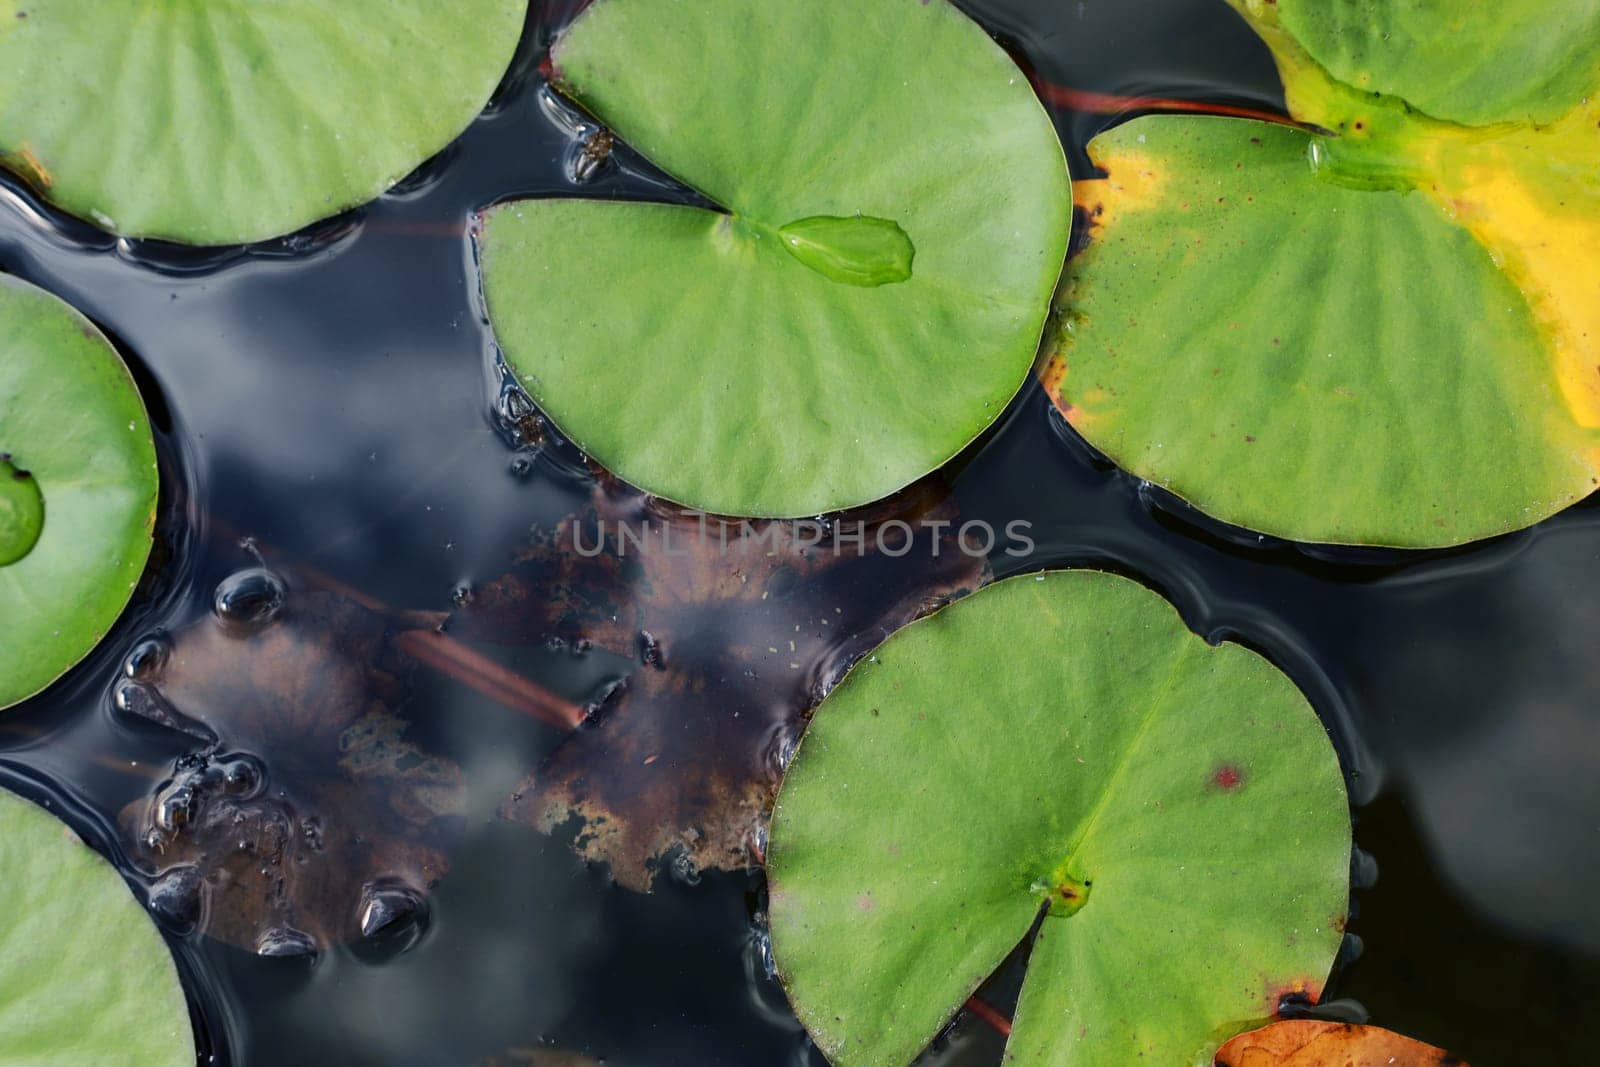 Pink water water lily with green water lilies or lotus flower Perry's in garden pond. Close-up of Nymphaea reflected on green water against sun. Flower landscape with copy space. Selective focus.